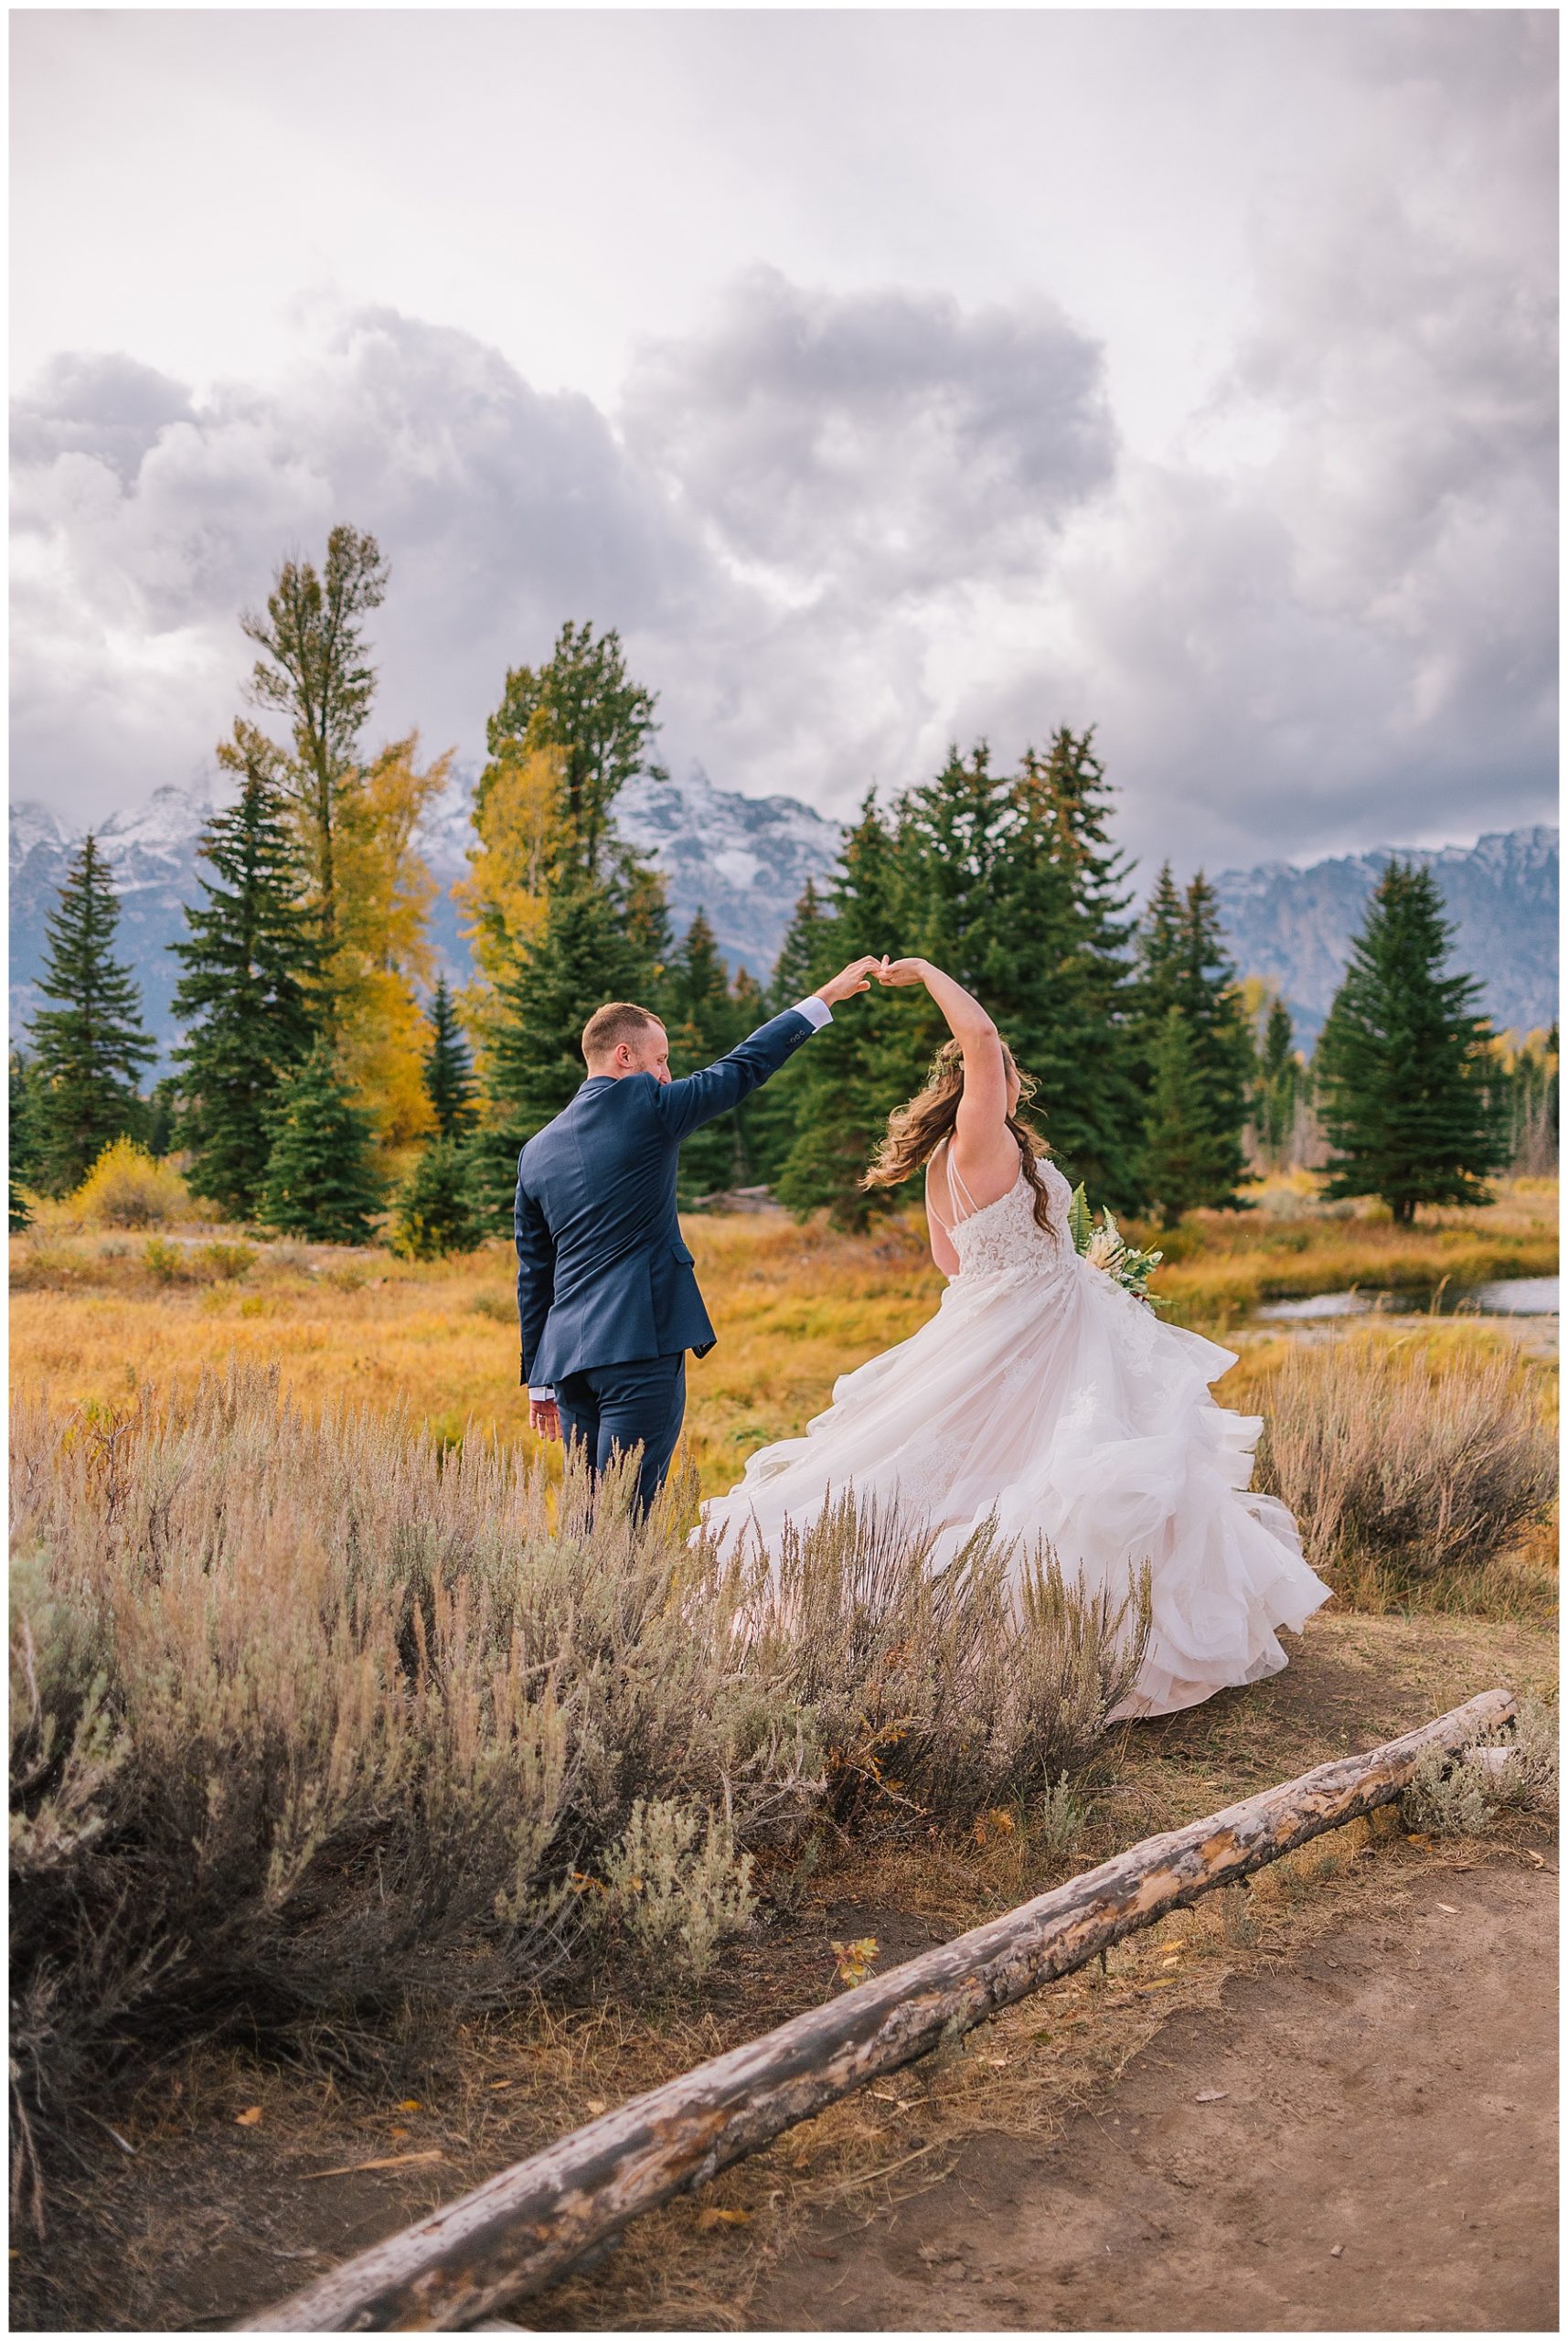 groom twirling his bride in the tetons as her dress flows through the yellow flowers